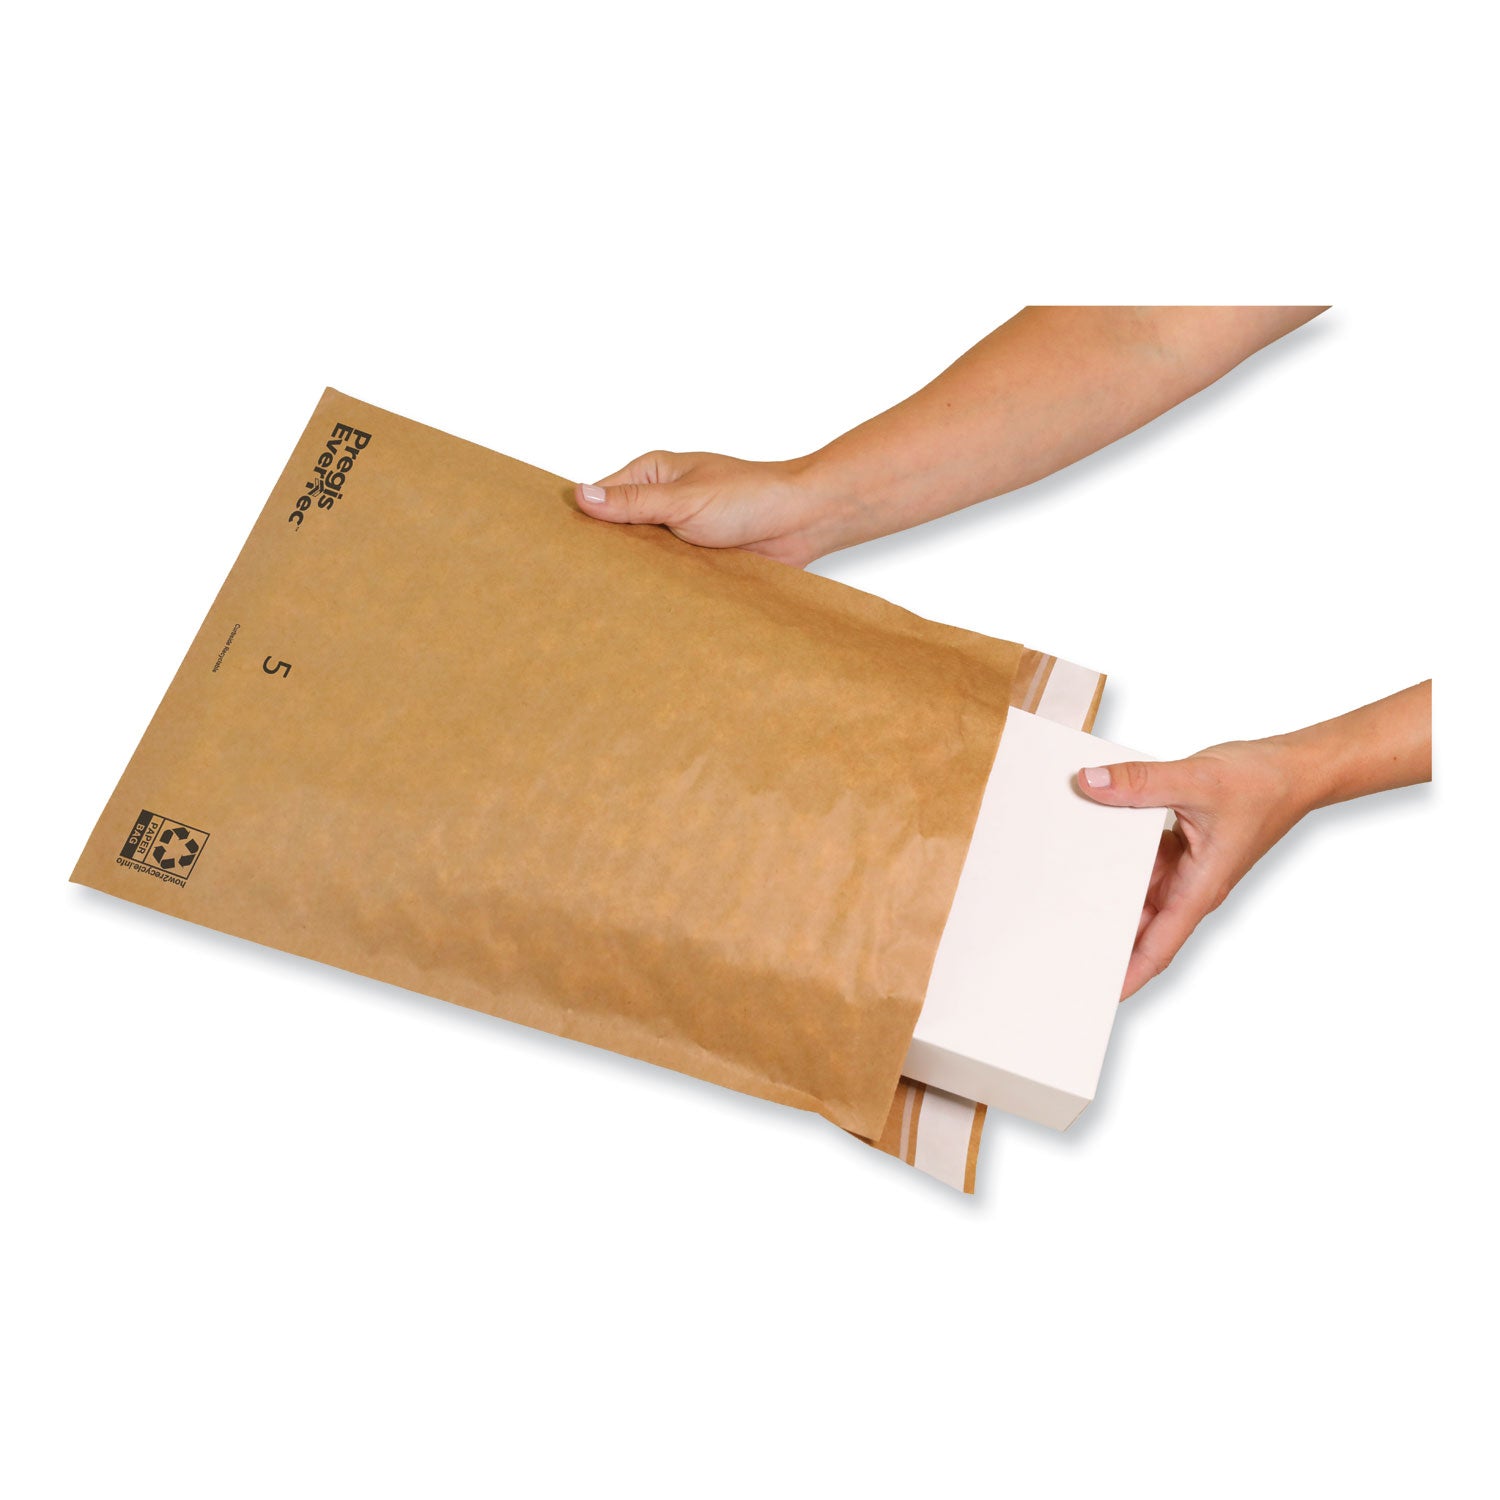 evertec-curbside-recyclable-padded-mailer-#5-kraft-paper-self-adhesive-closure-12-x-15-brown-100-carton_pgs4083816 - 2